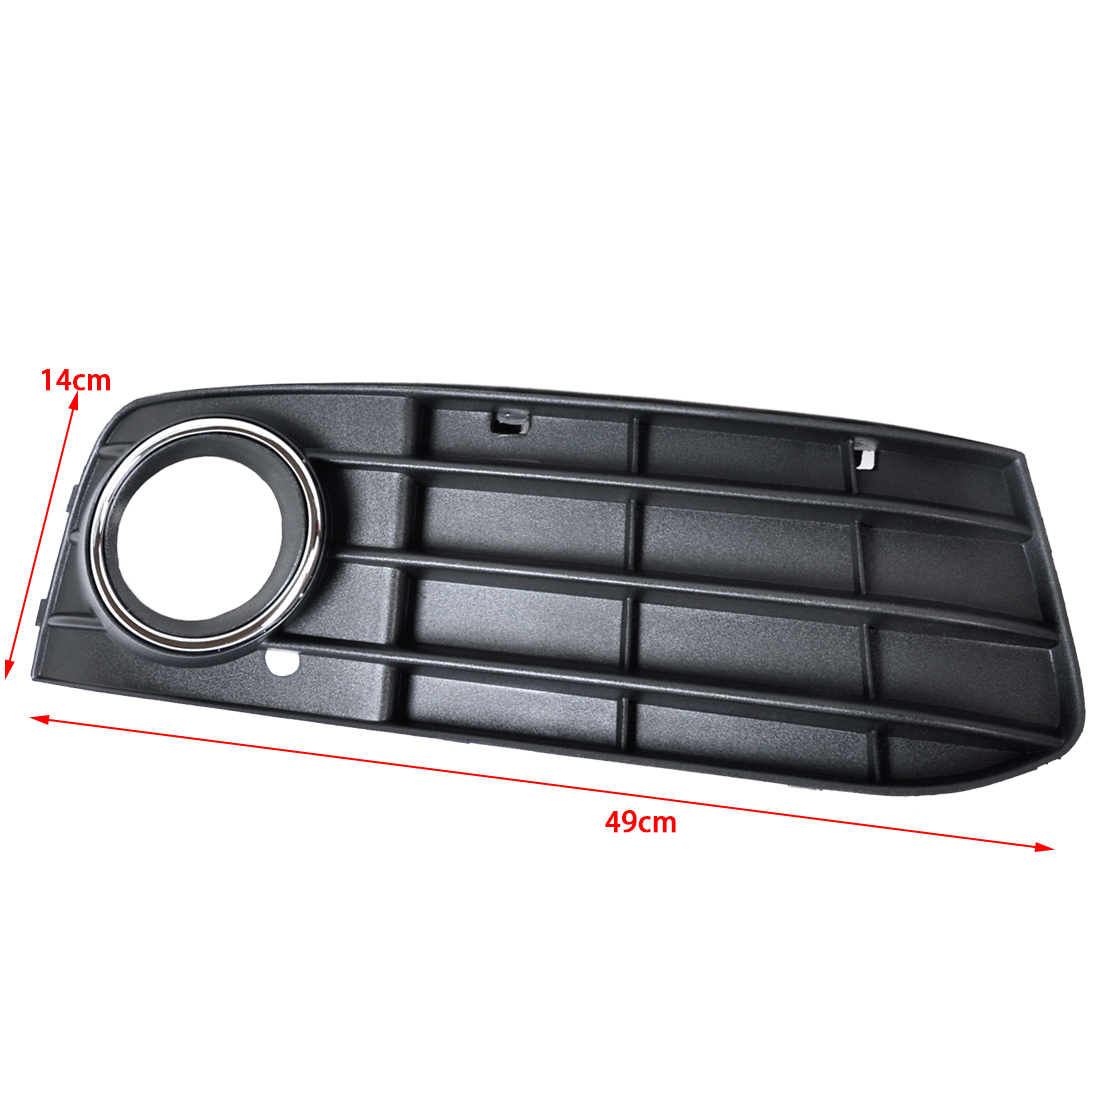 8K0807682A01C Right Bumper Fog Light Lamp Cover Grille for ...